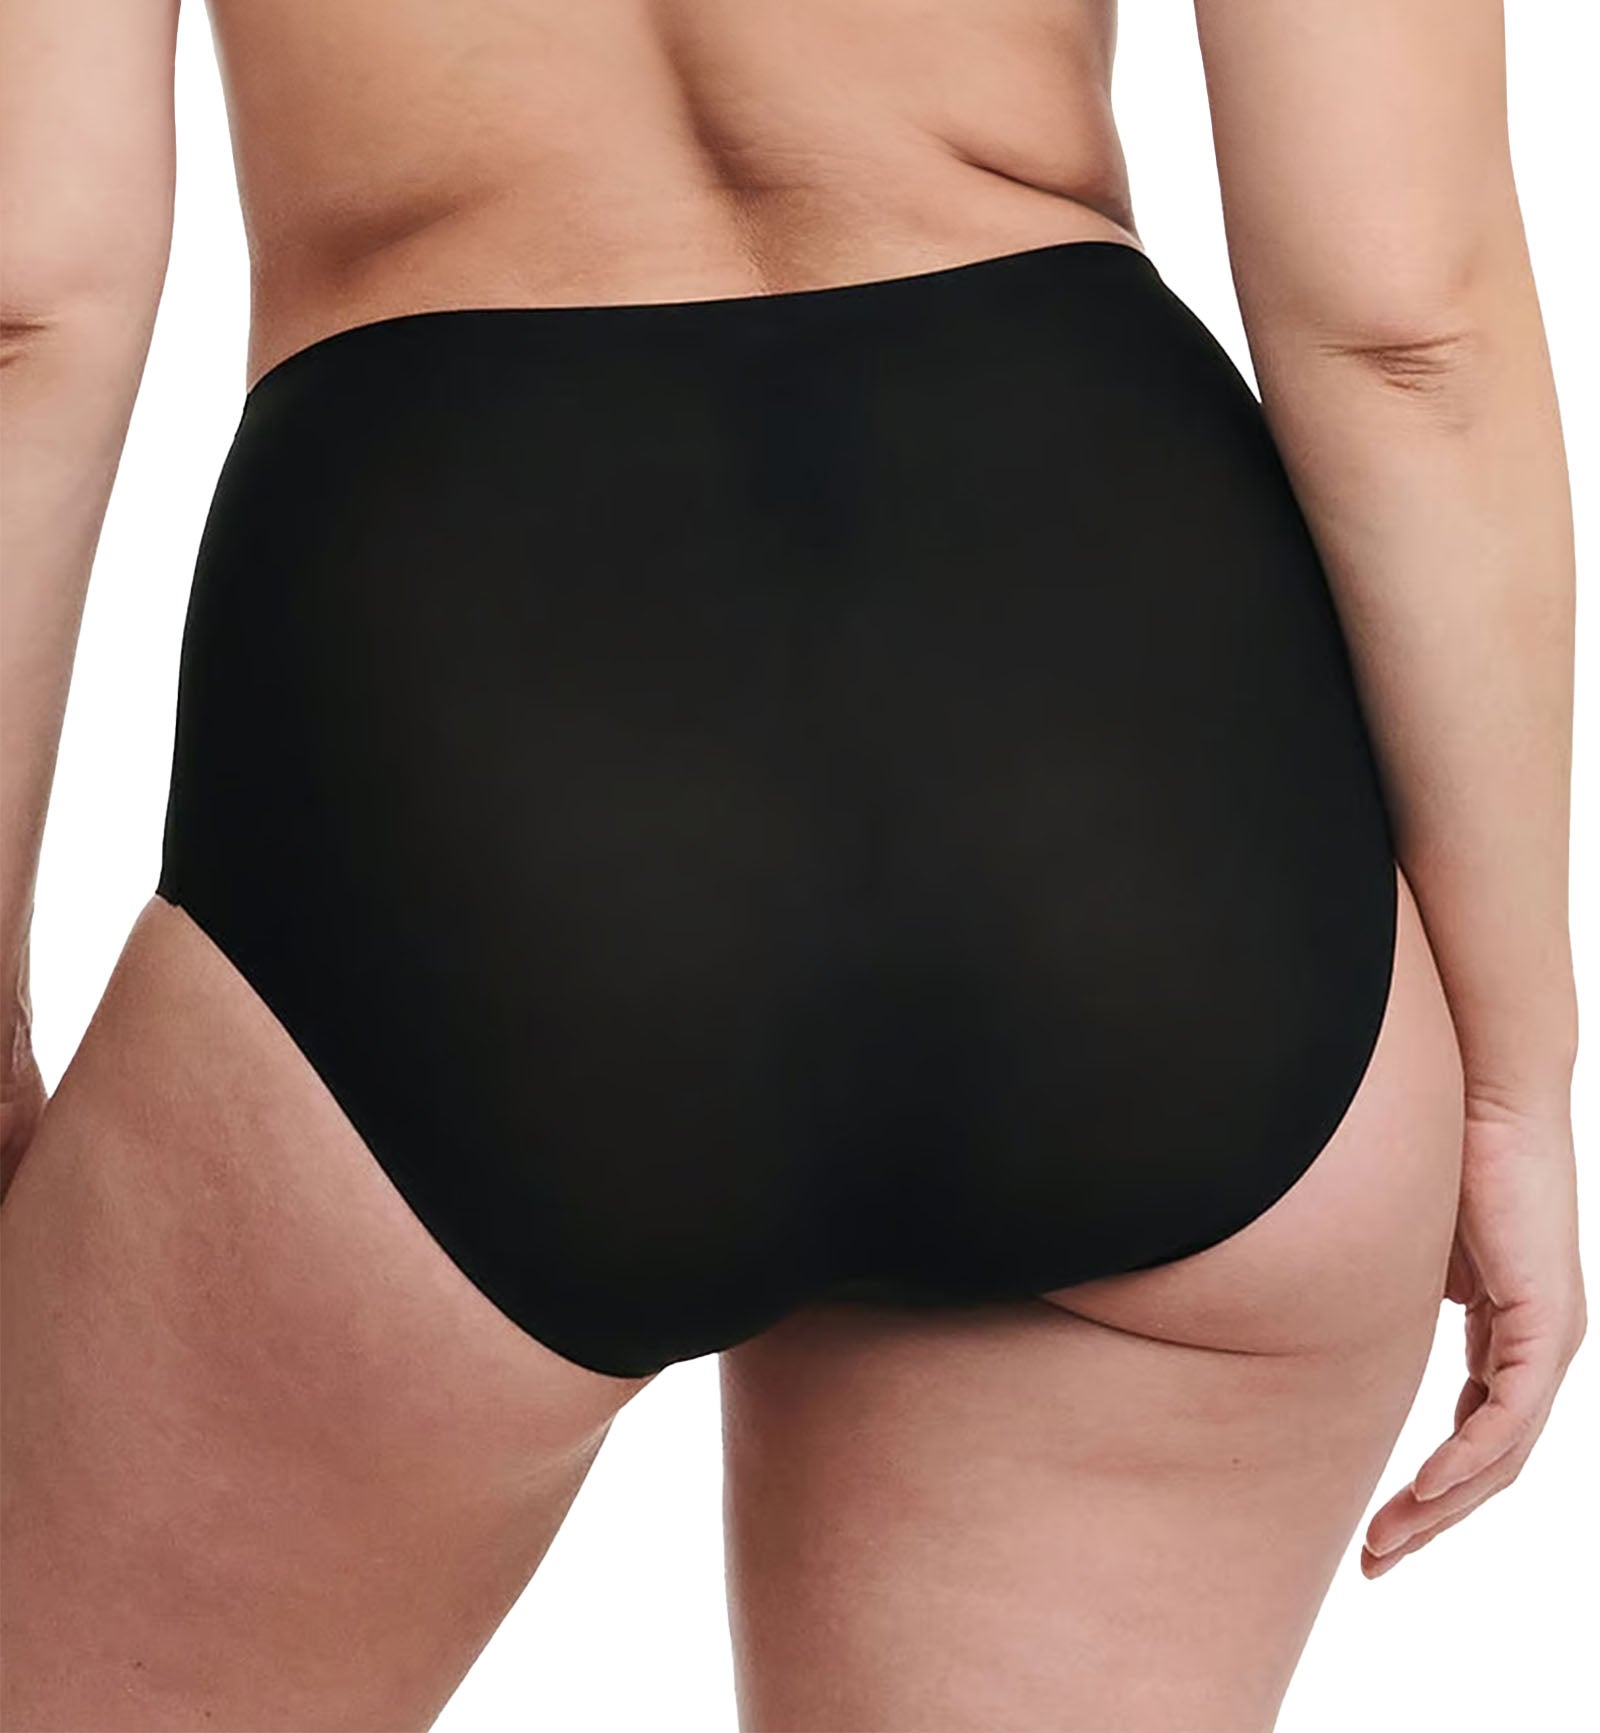 Chantelle 3-PACK Softstretch Full Brief (C10070),Black - Black,One Size